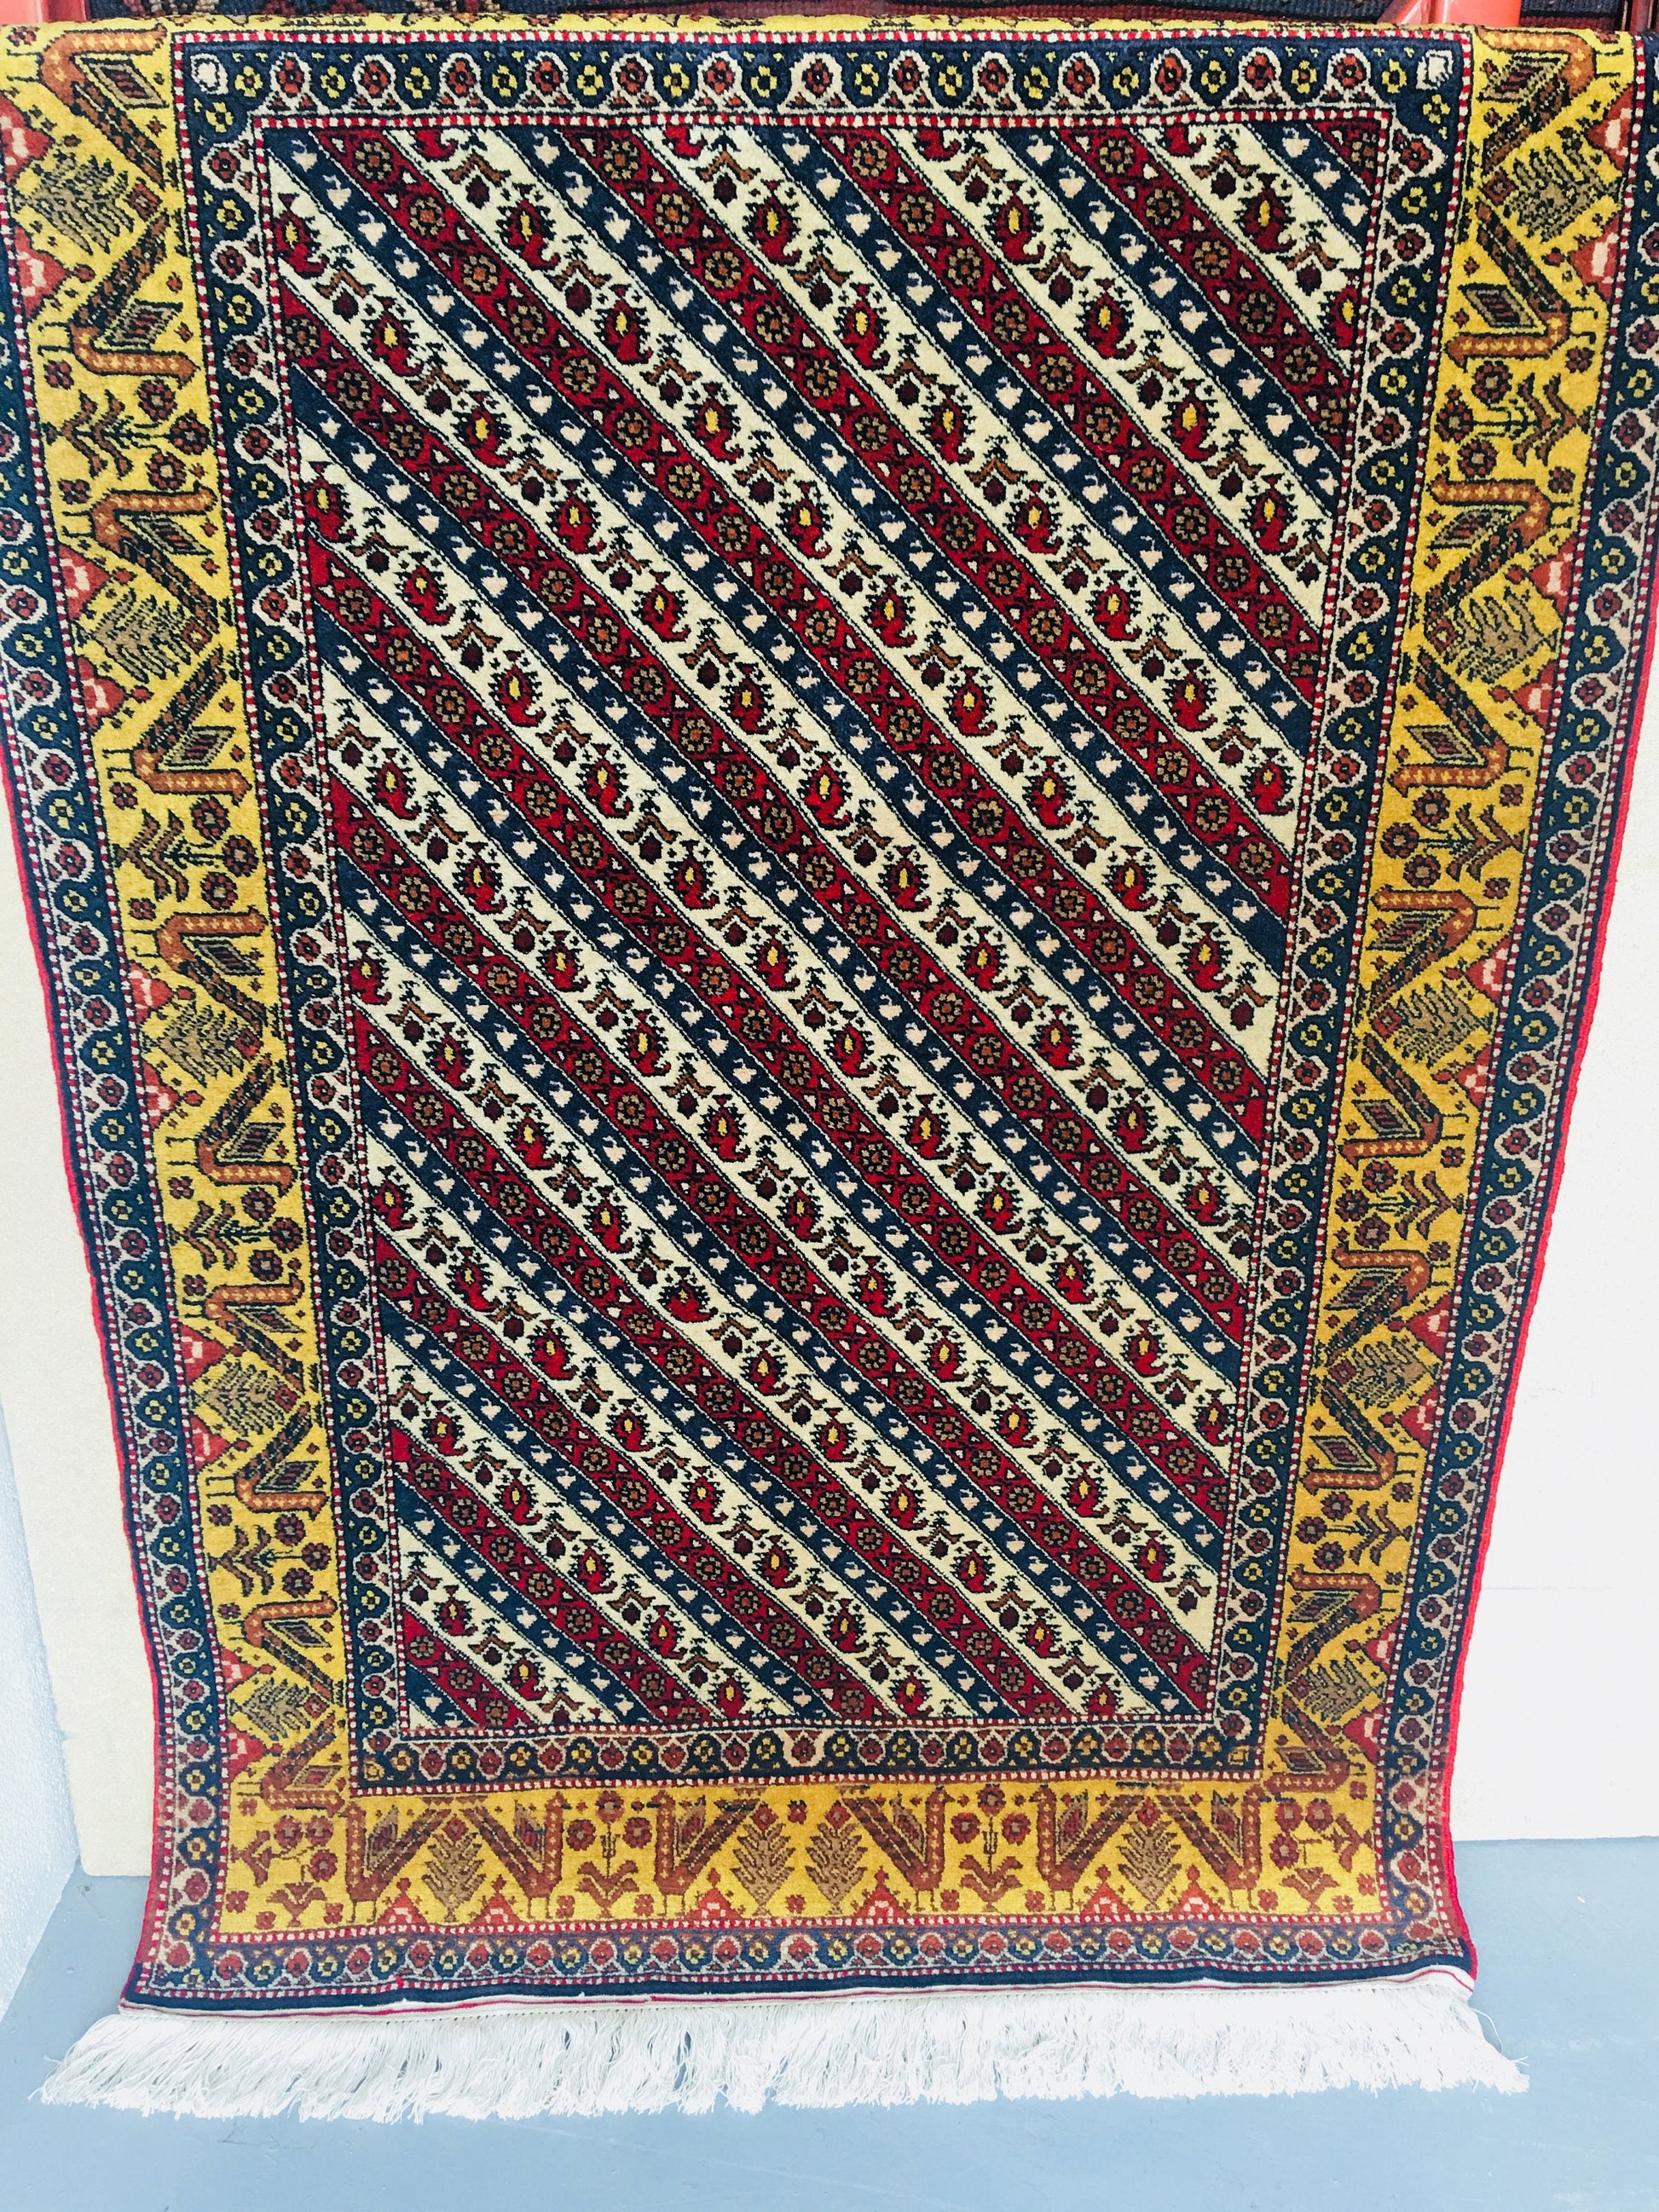 Oriental Striped Red White 3x5 Rug with Tribal Birds in Yellow Border